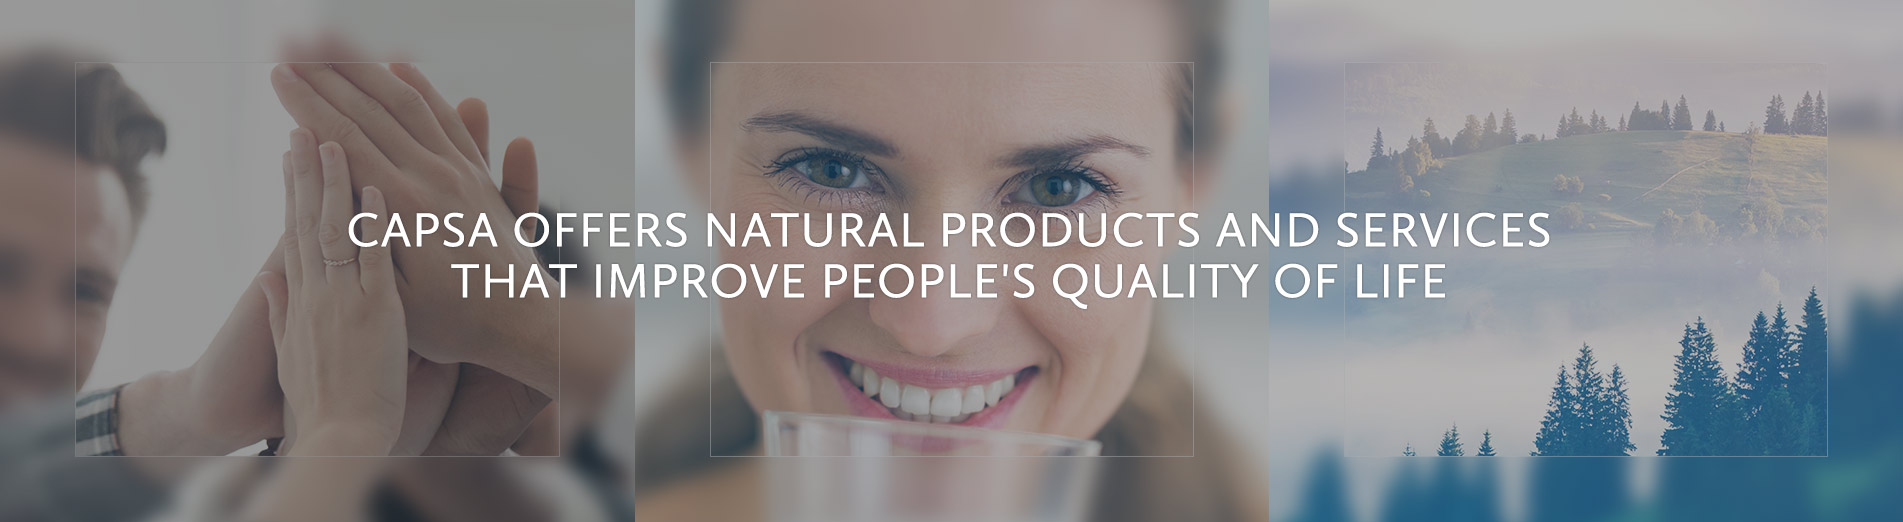 Capsa offers natural products and services that improve people's quality of life